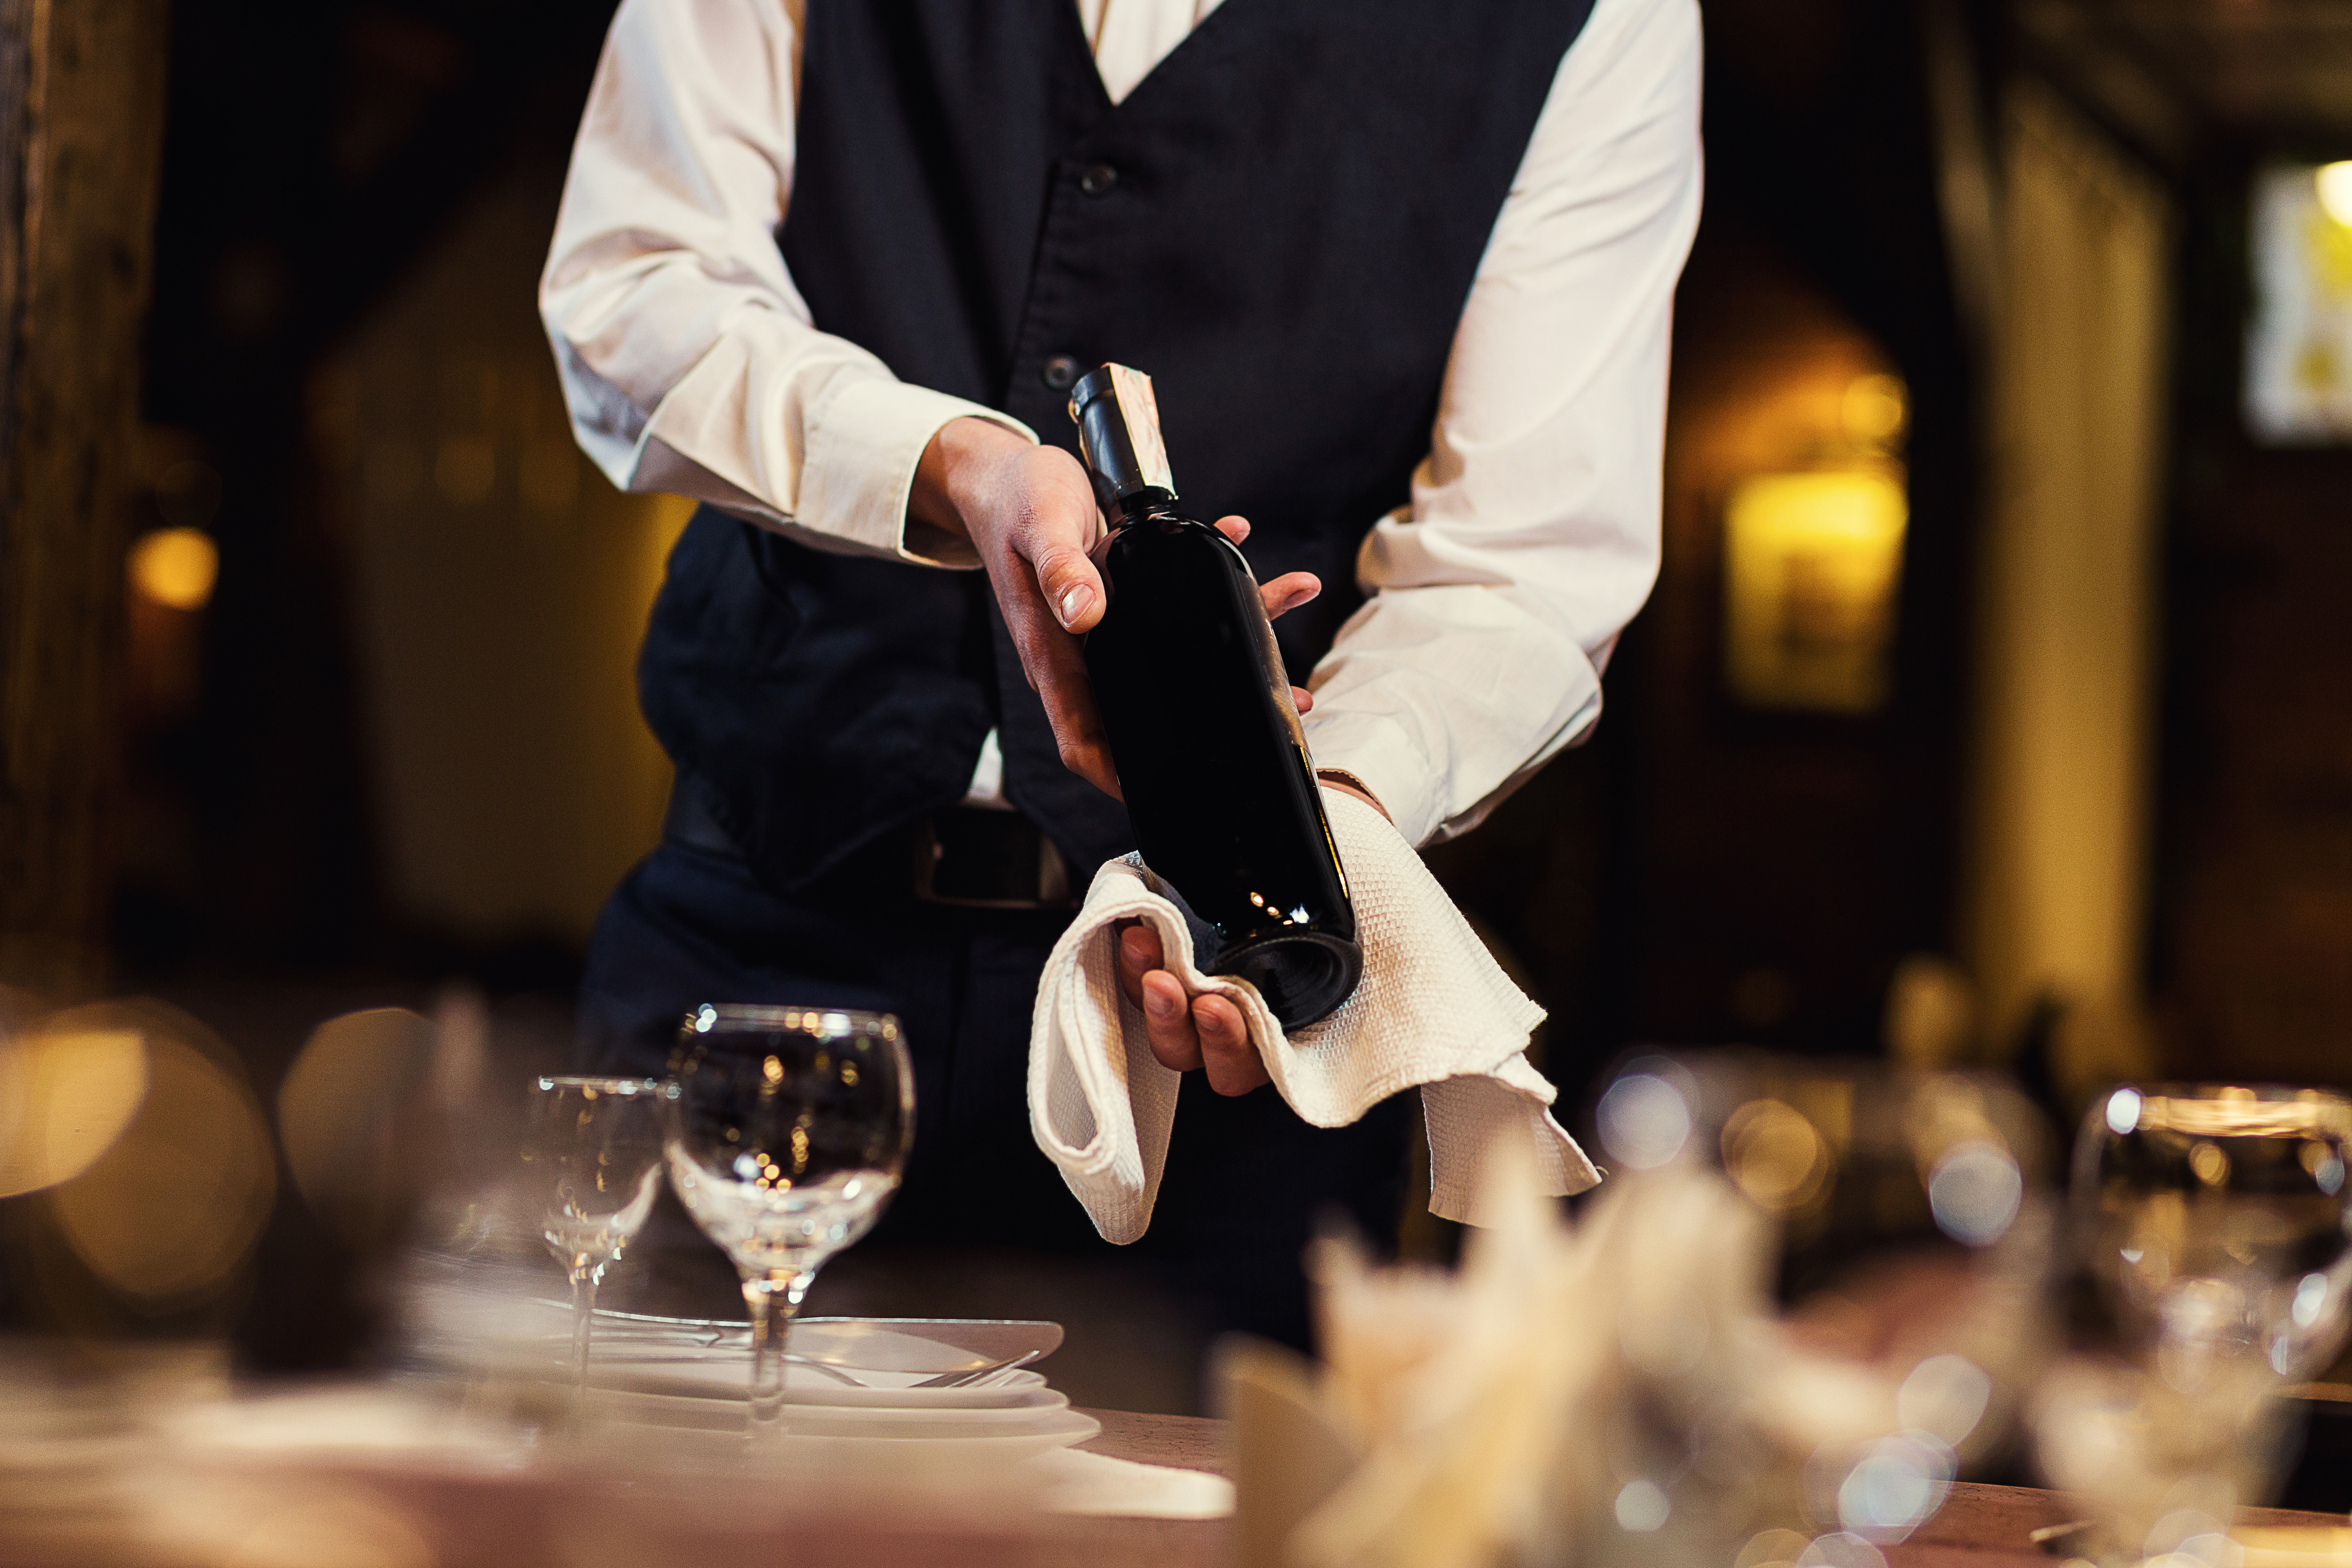 The waiter in uniform with a white towel. | Source: Shutterstock